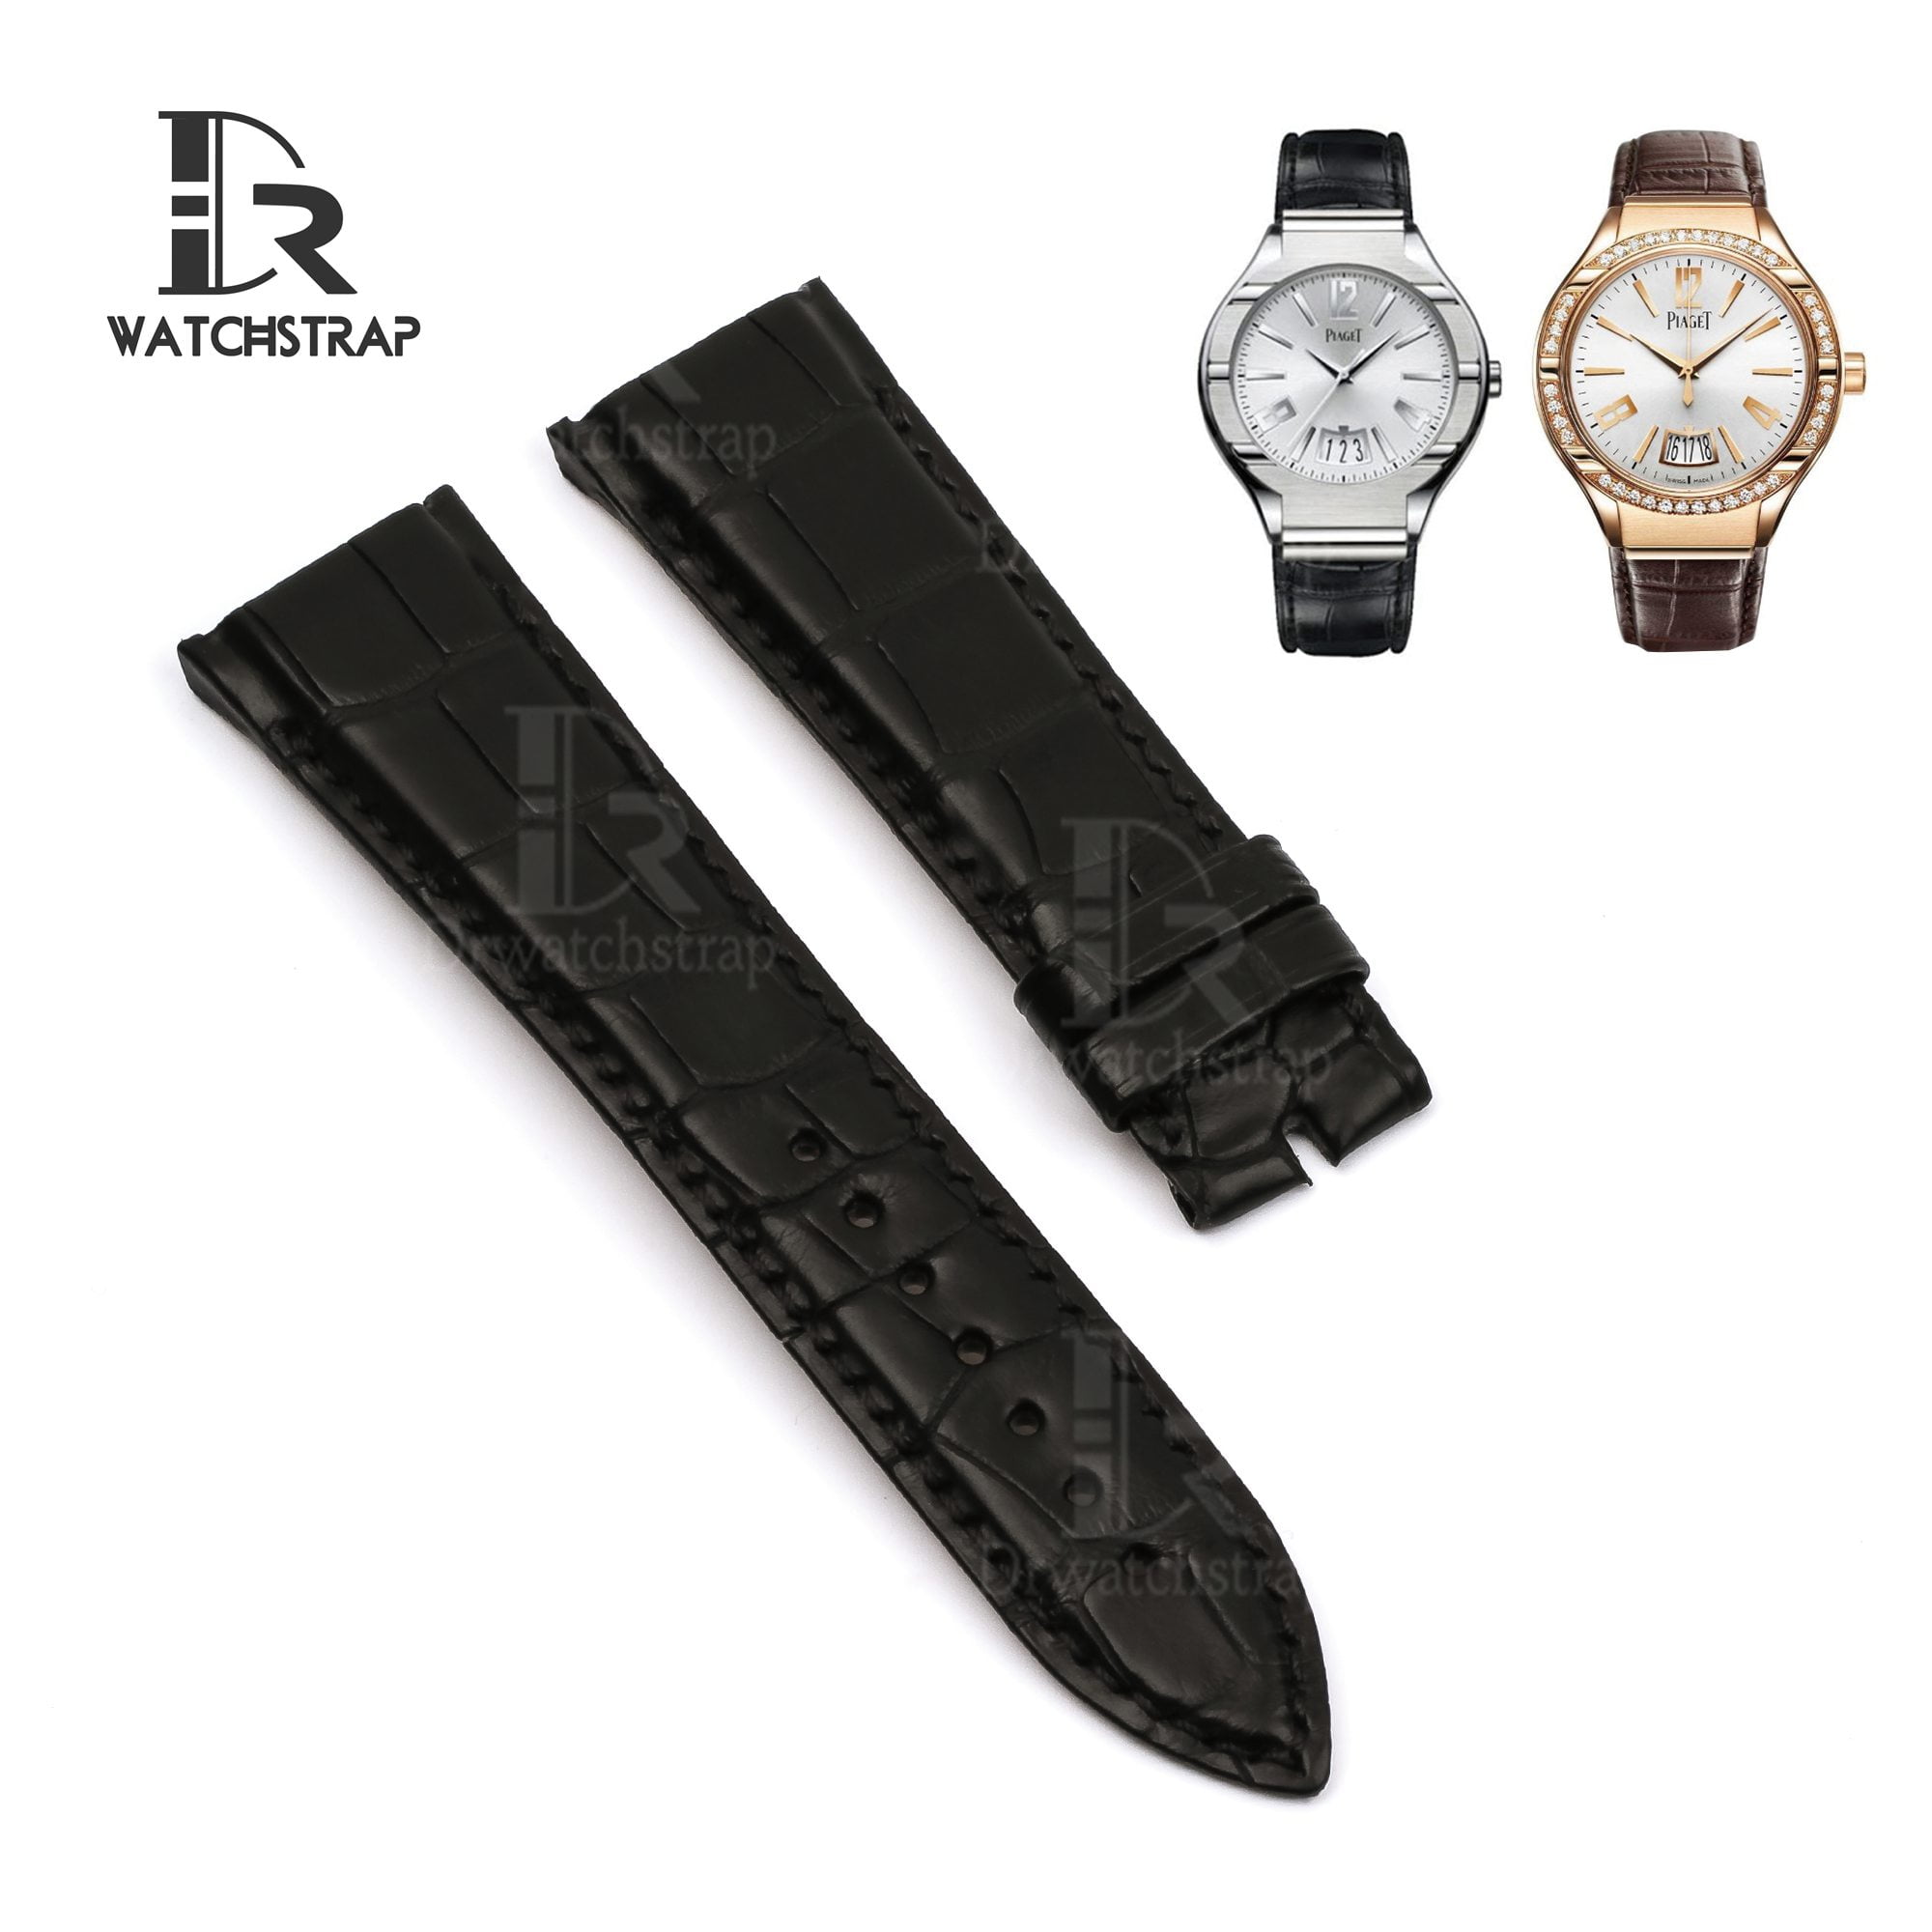 Buy Handmade Piaget watch band strap replacement